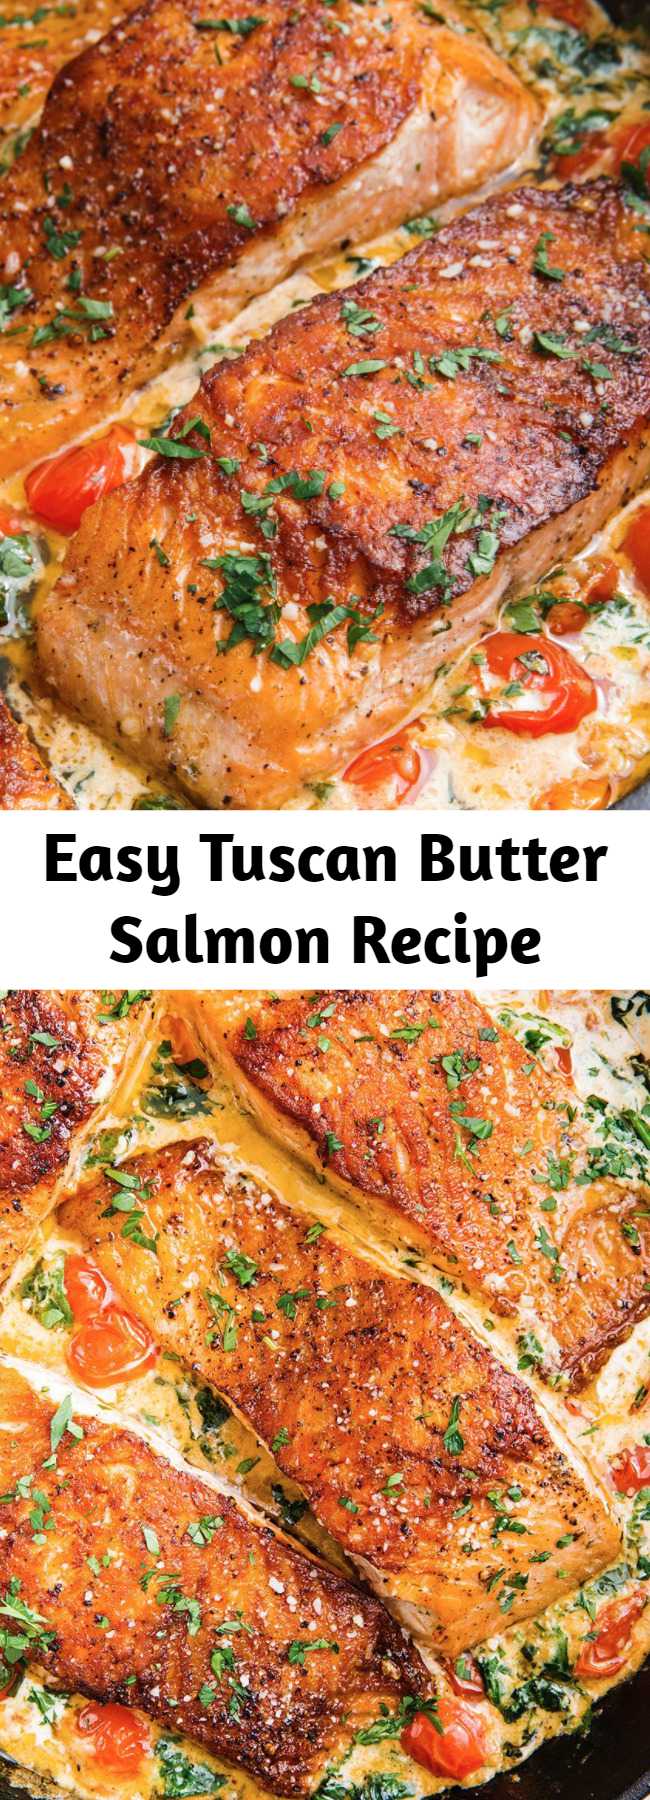 Easy Tuscan Butter Salmon Recipe - There's a reason this is one of our most popular recipes of all time. The tomato-and-basil cream sauce with Parmesan is unbelievably dreamy. We make it often for friends and family because we love it so much. #healthyrecipes #easyrecipes #weeknightdinners #salmon #tuscanbuttersalmon